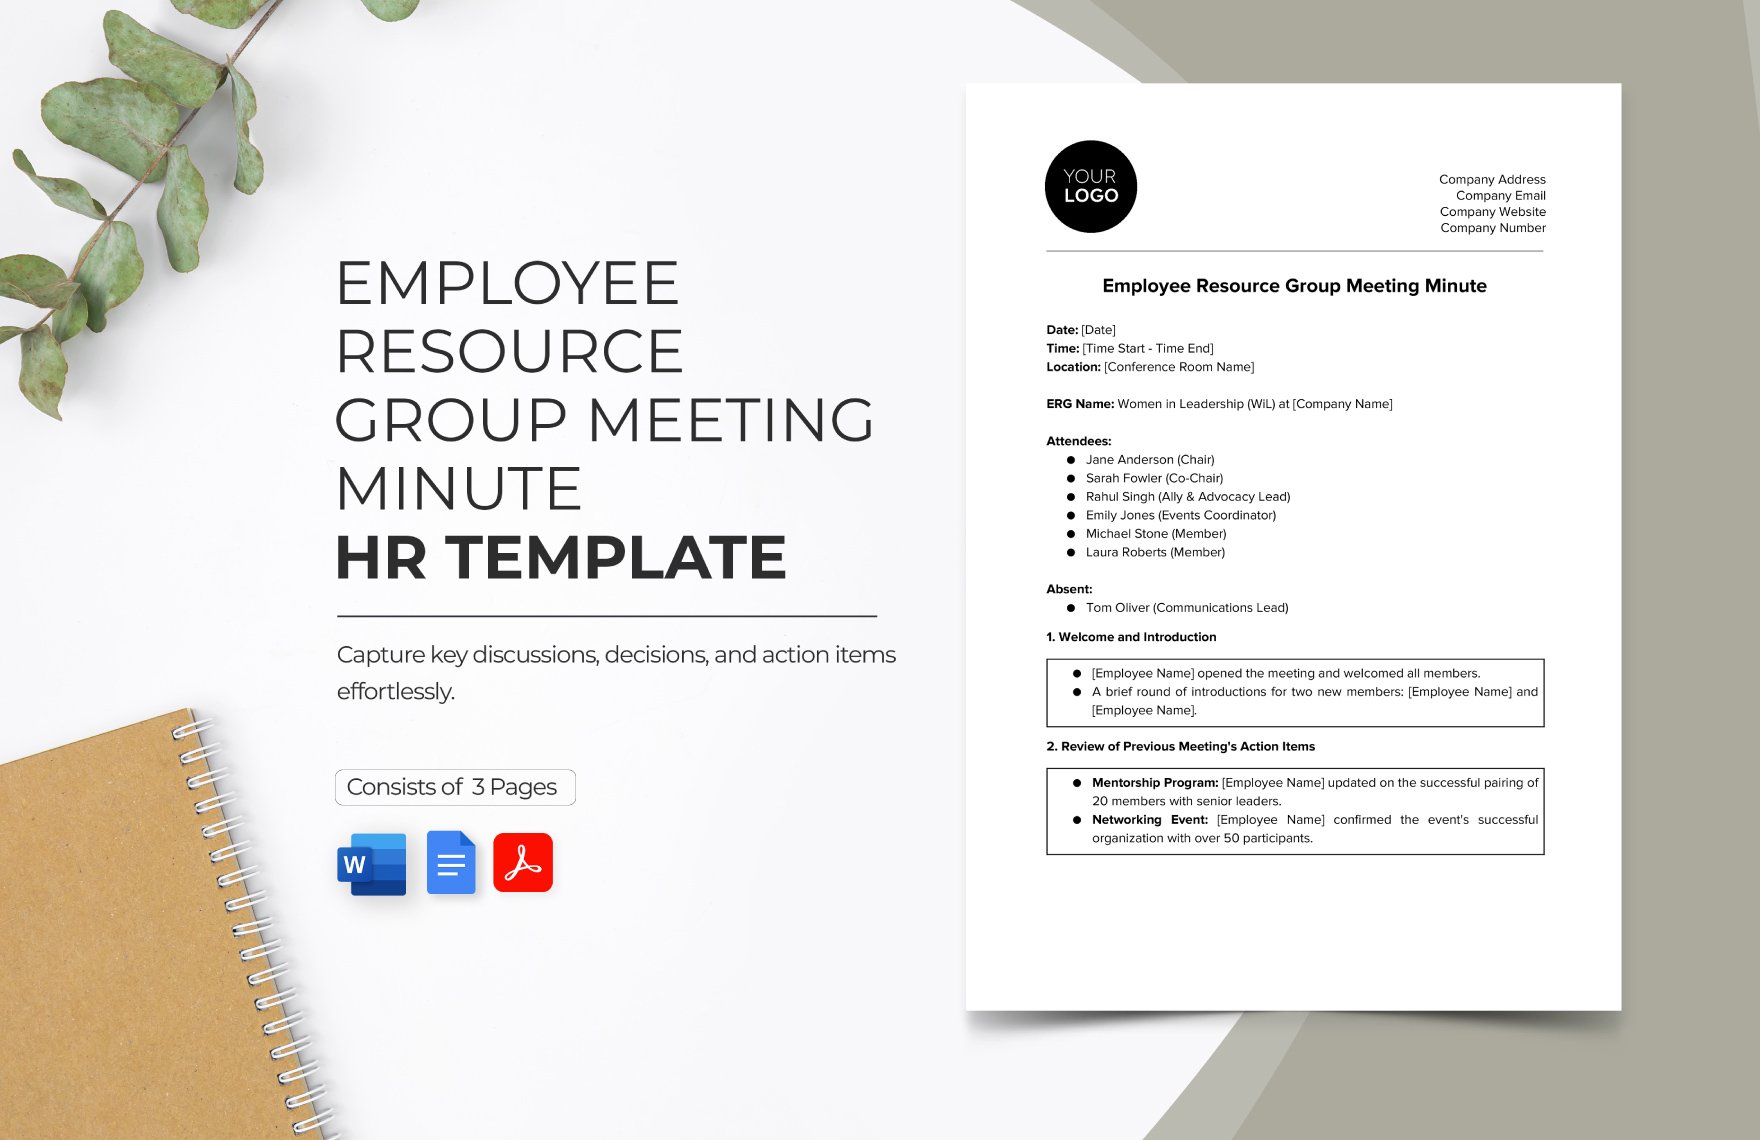 Employee Resource Group Meeting Minute HR Template